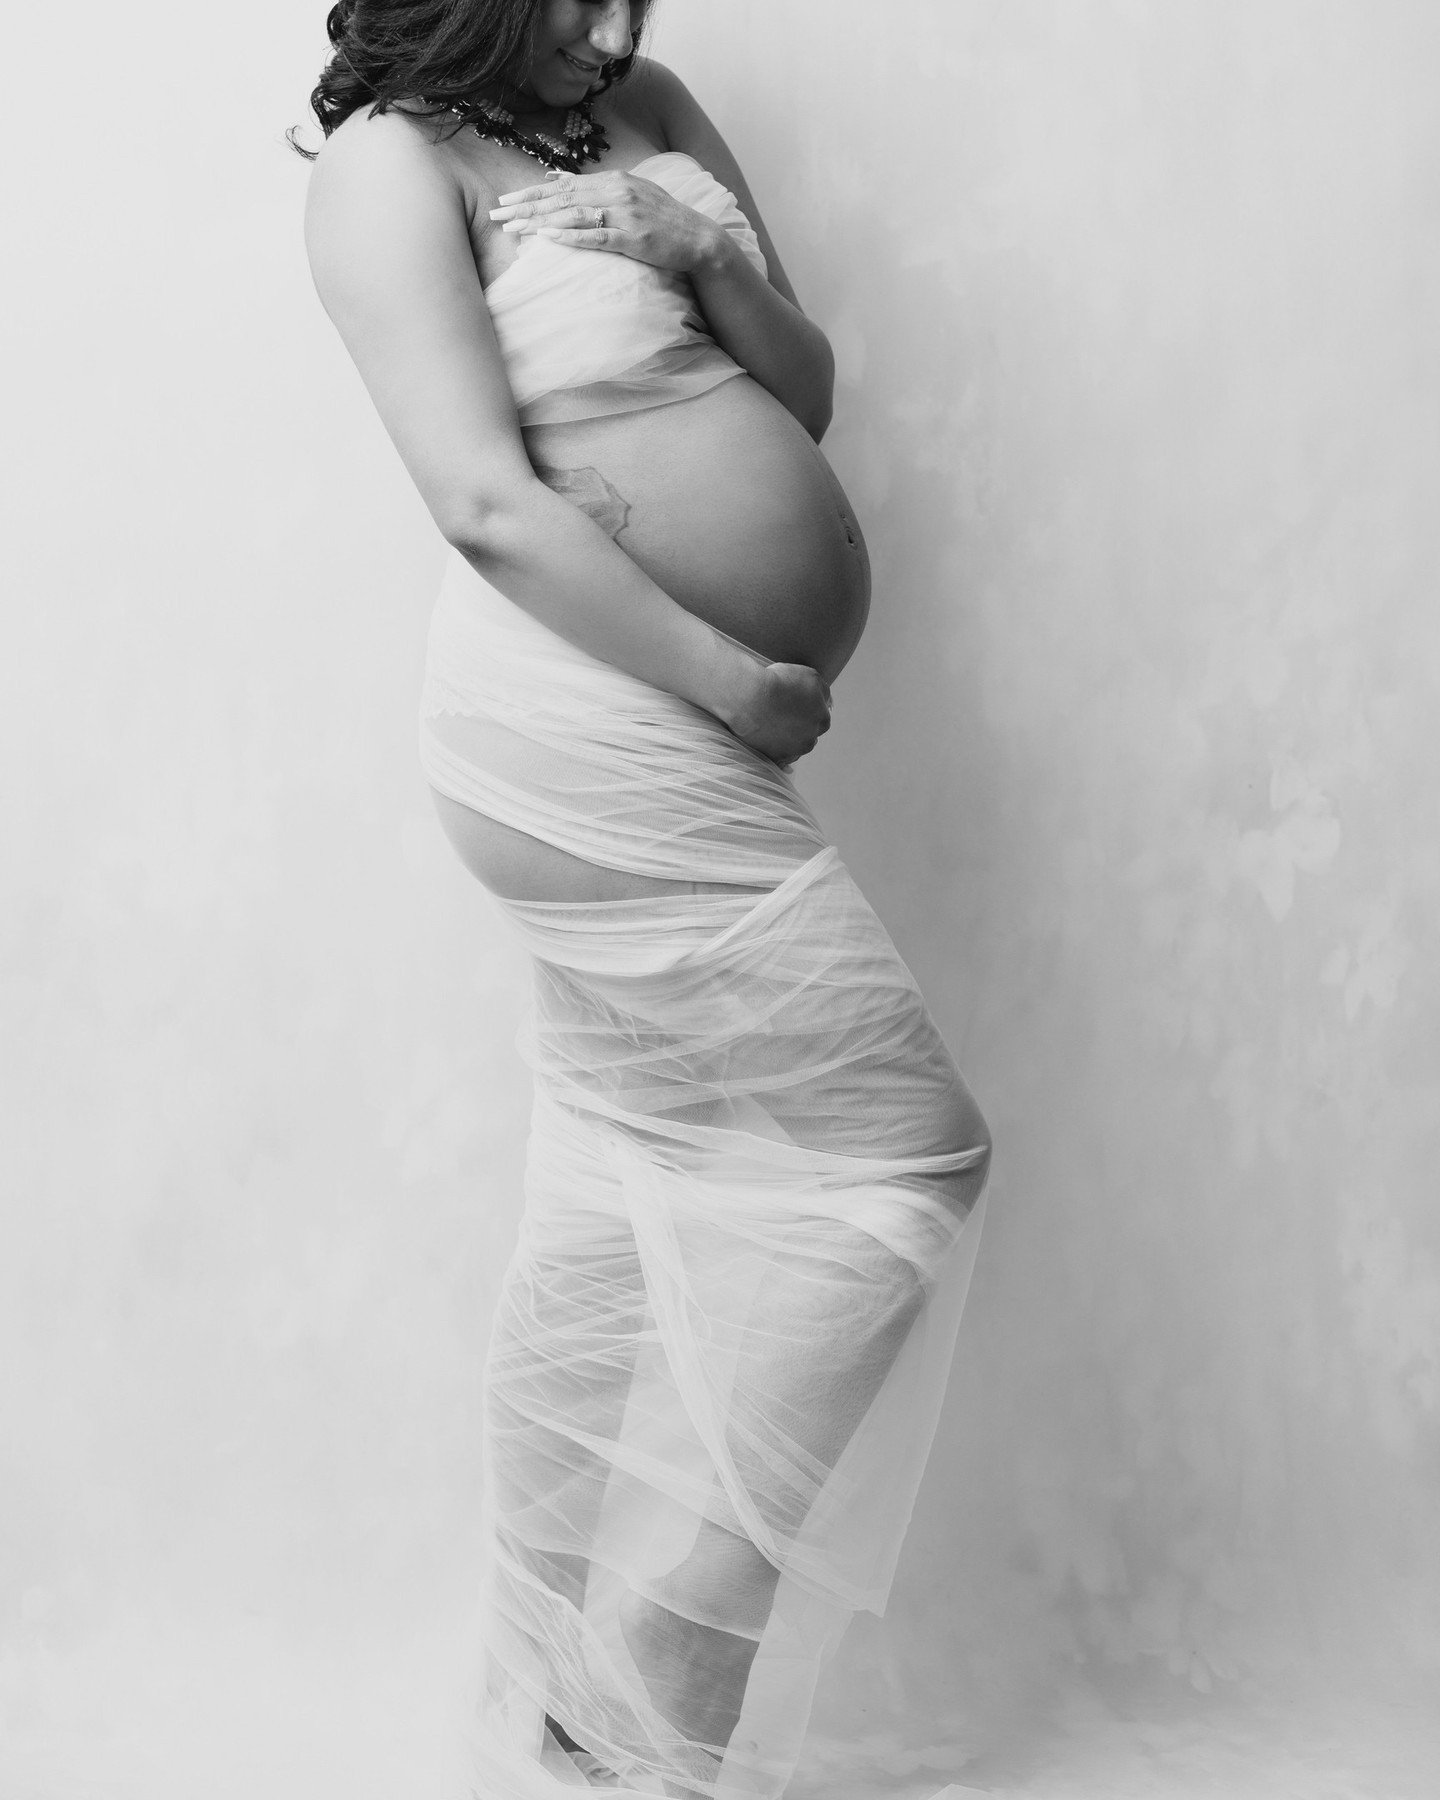 Wrapped in a soft tulle! There is something just magical about this moment.⁠
⁠
⁠
Documenting this time is so special... ⁠
⁠
Book your session online www.priscillagreenphotography.com⁠
⁠
Now reserving Maternity photo session dates⁠ ⁠
⁠
⁠
⁠.⁠
.⁠
.⁠
.⁠
